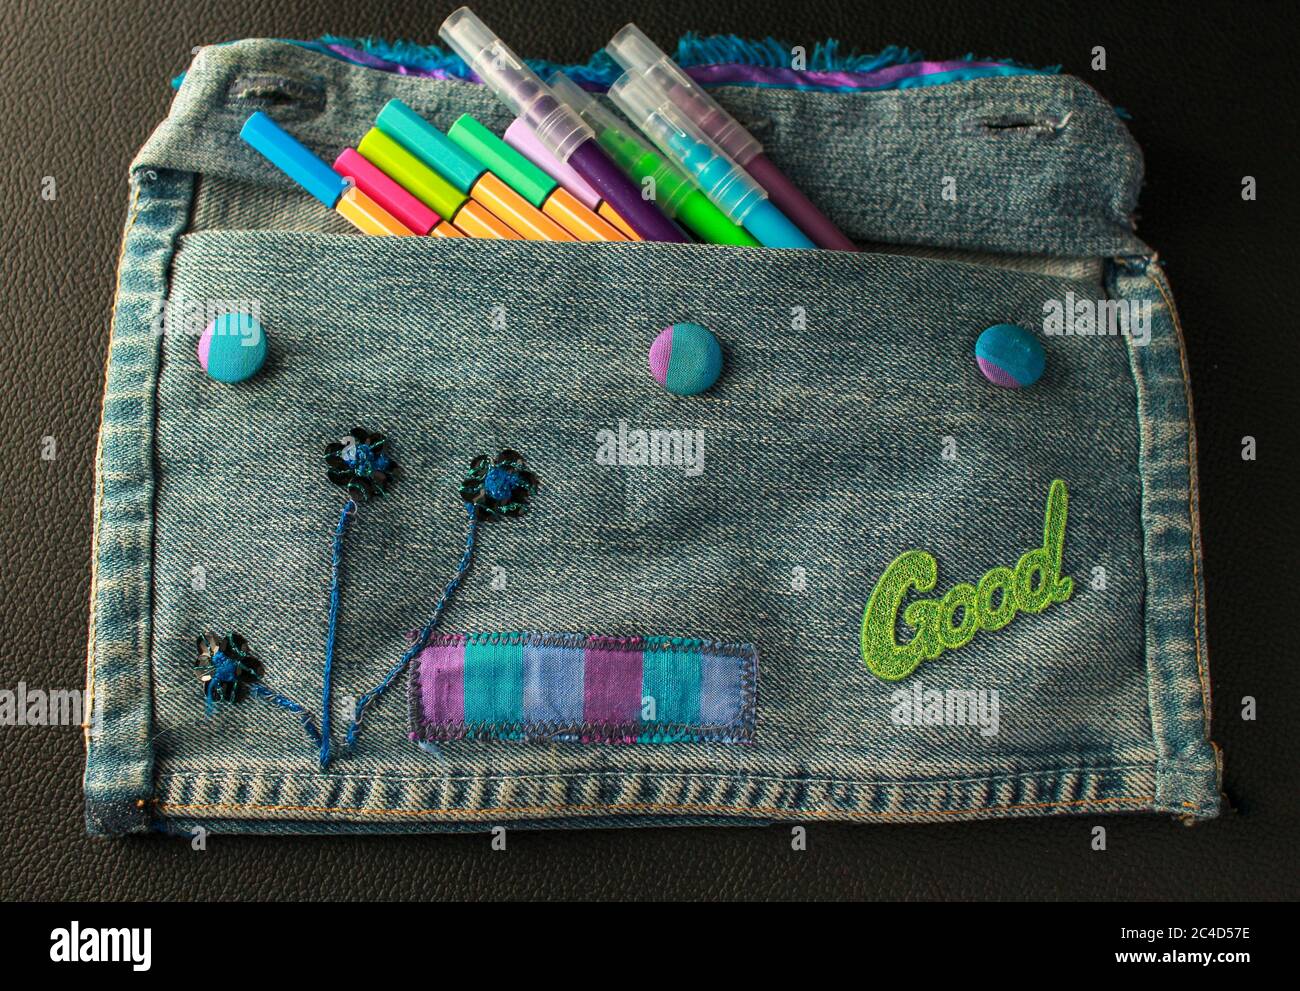 Closeup of DIY pencil case made of jeans and other objects with colorful  pens in it Stock Photo - Alamy